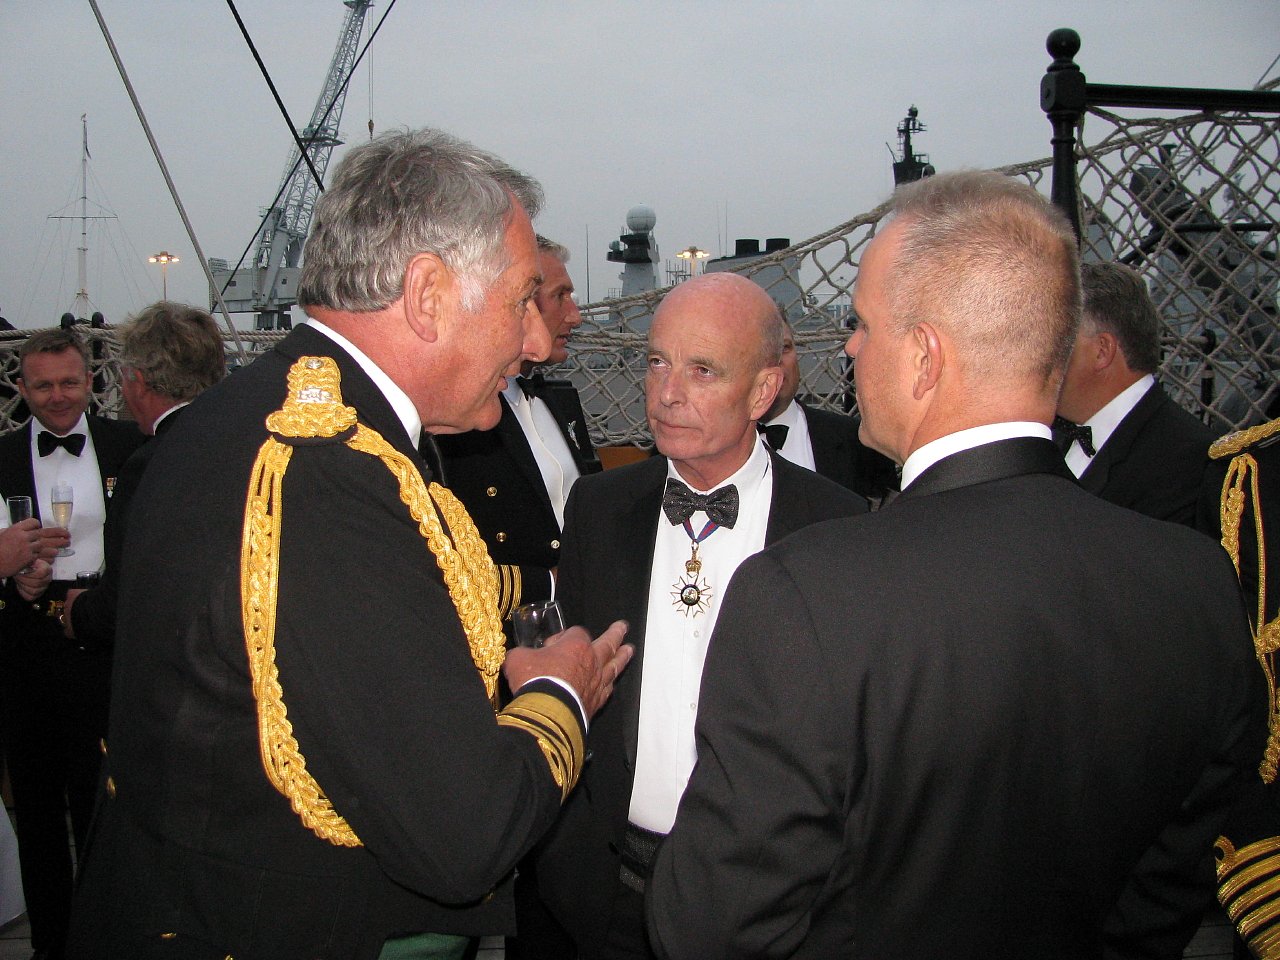 Project+Vernon+charity+dinner+on+board+HMS+Victory+11+Sep+2014+(43).jpg